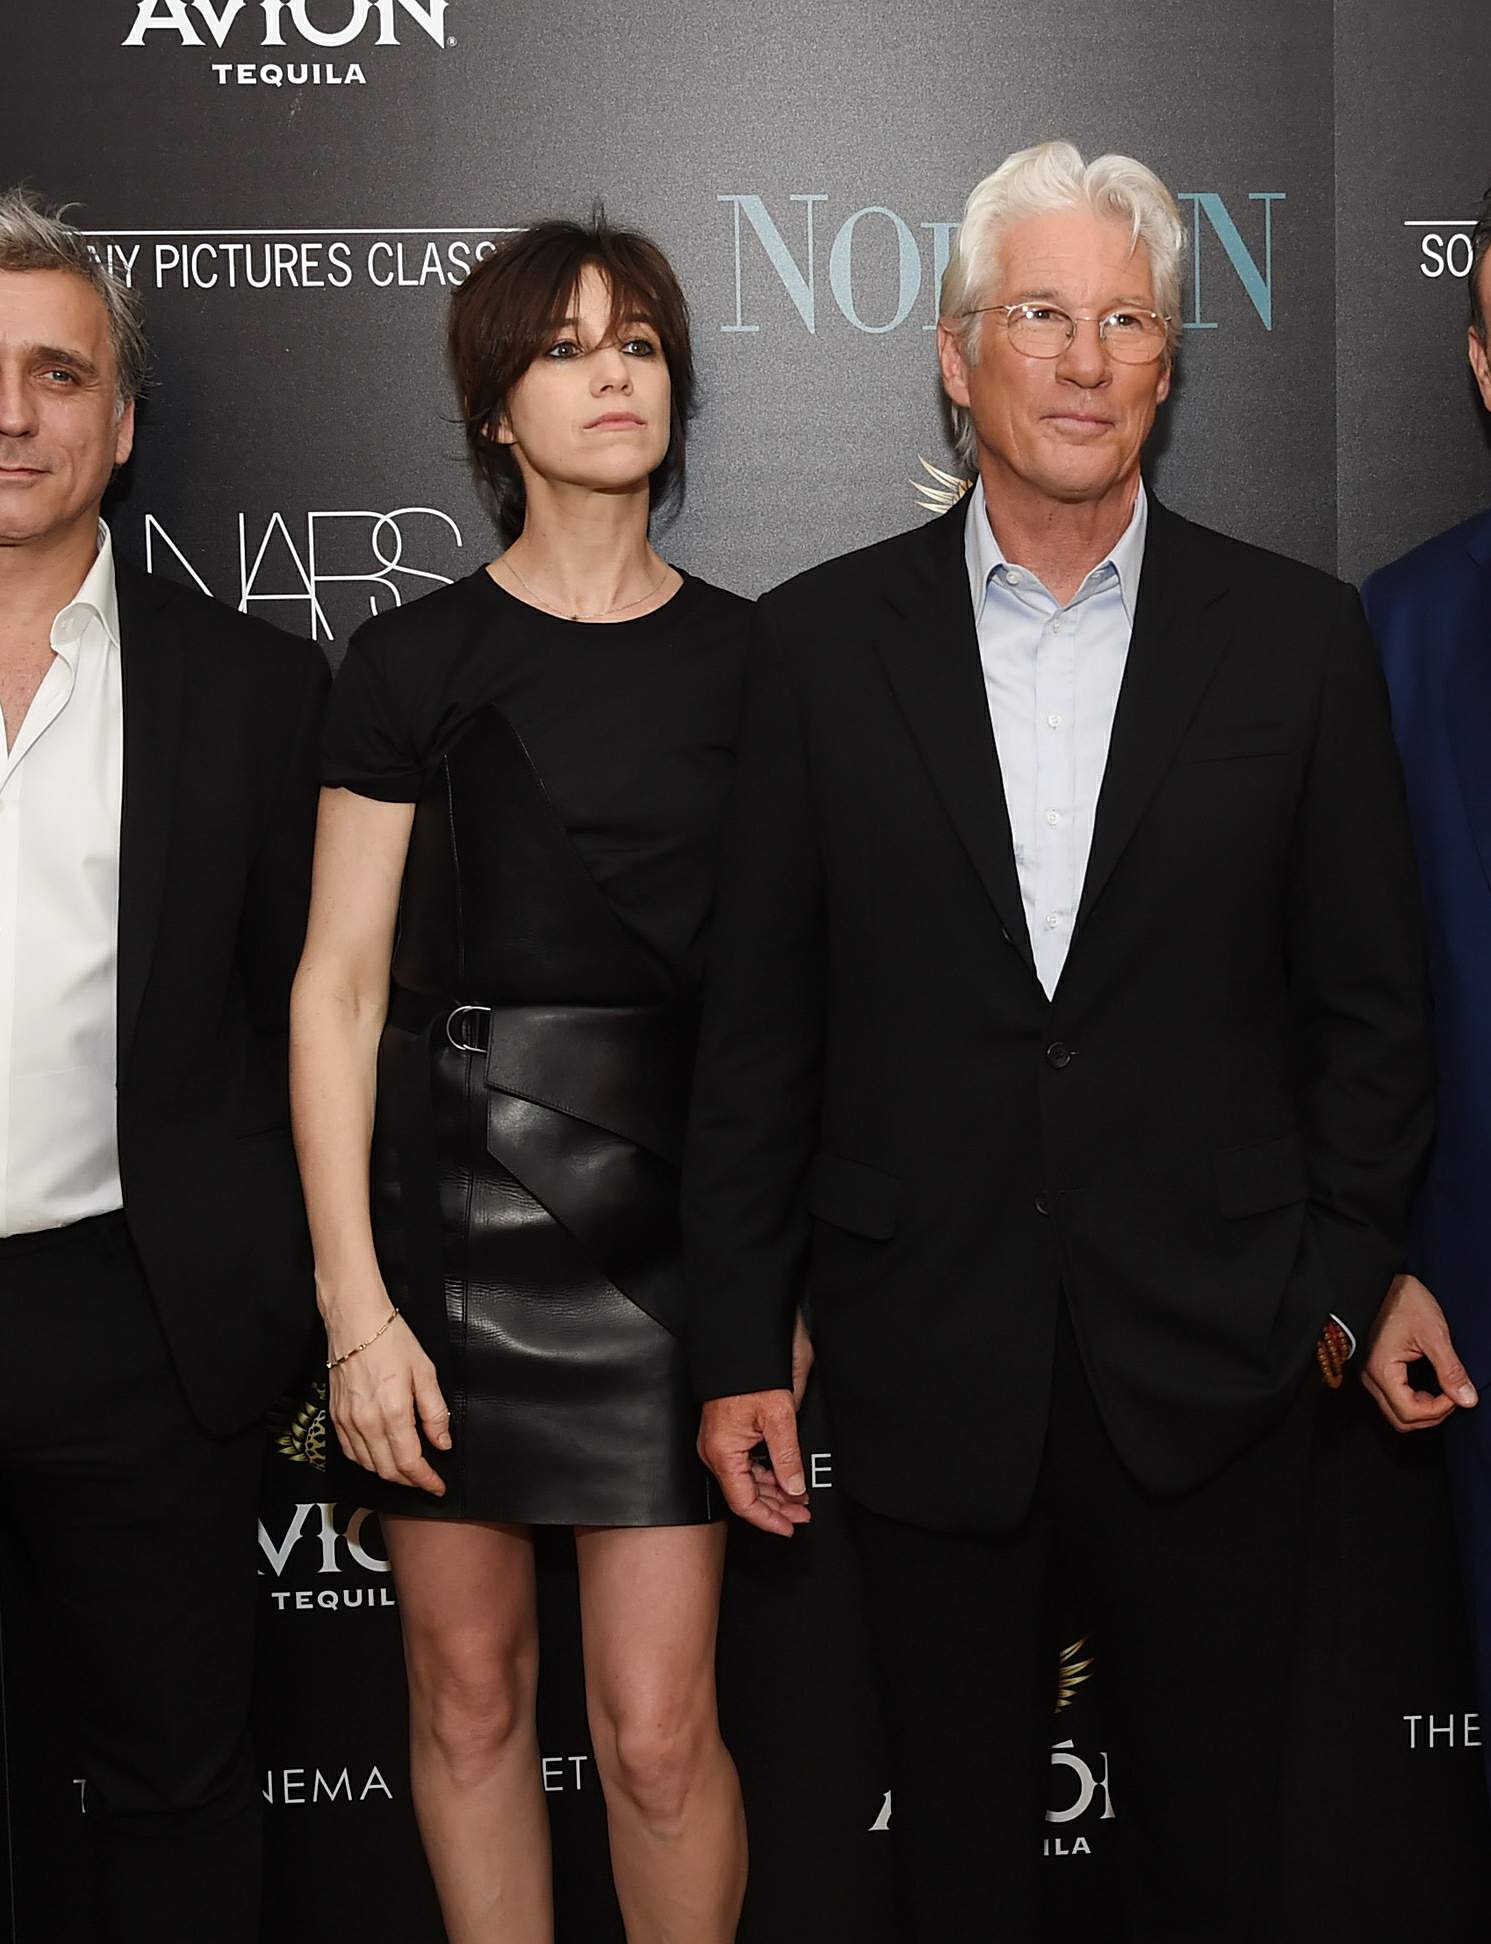 Charlotte Gainsbourg attends the premiere of Norman